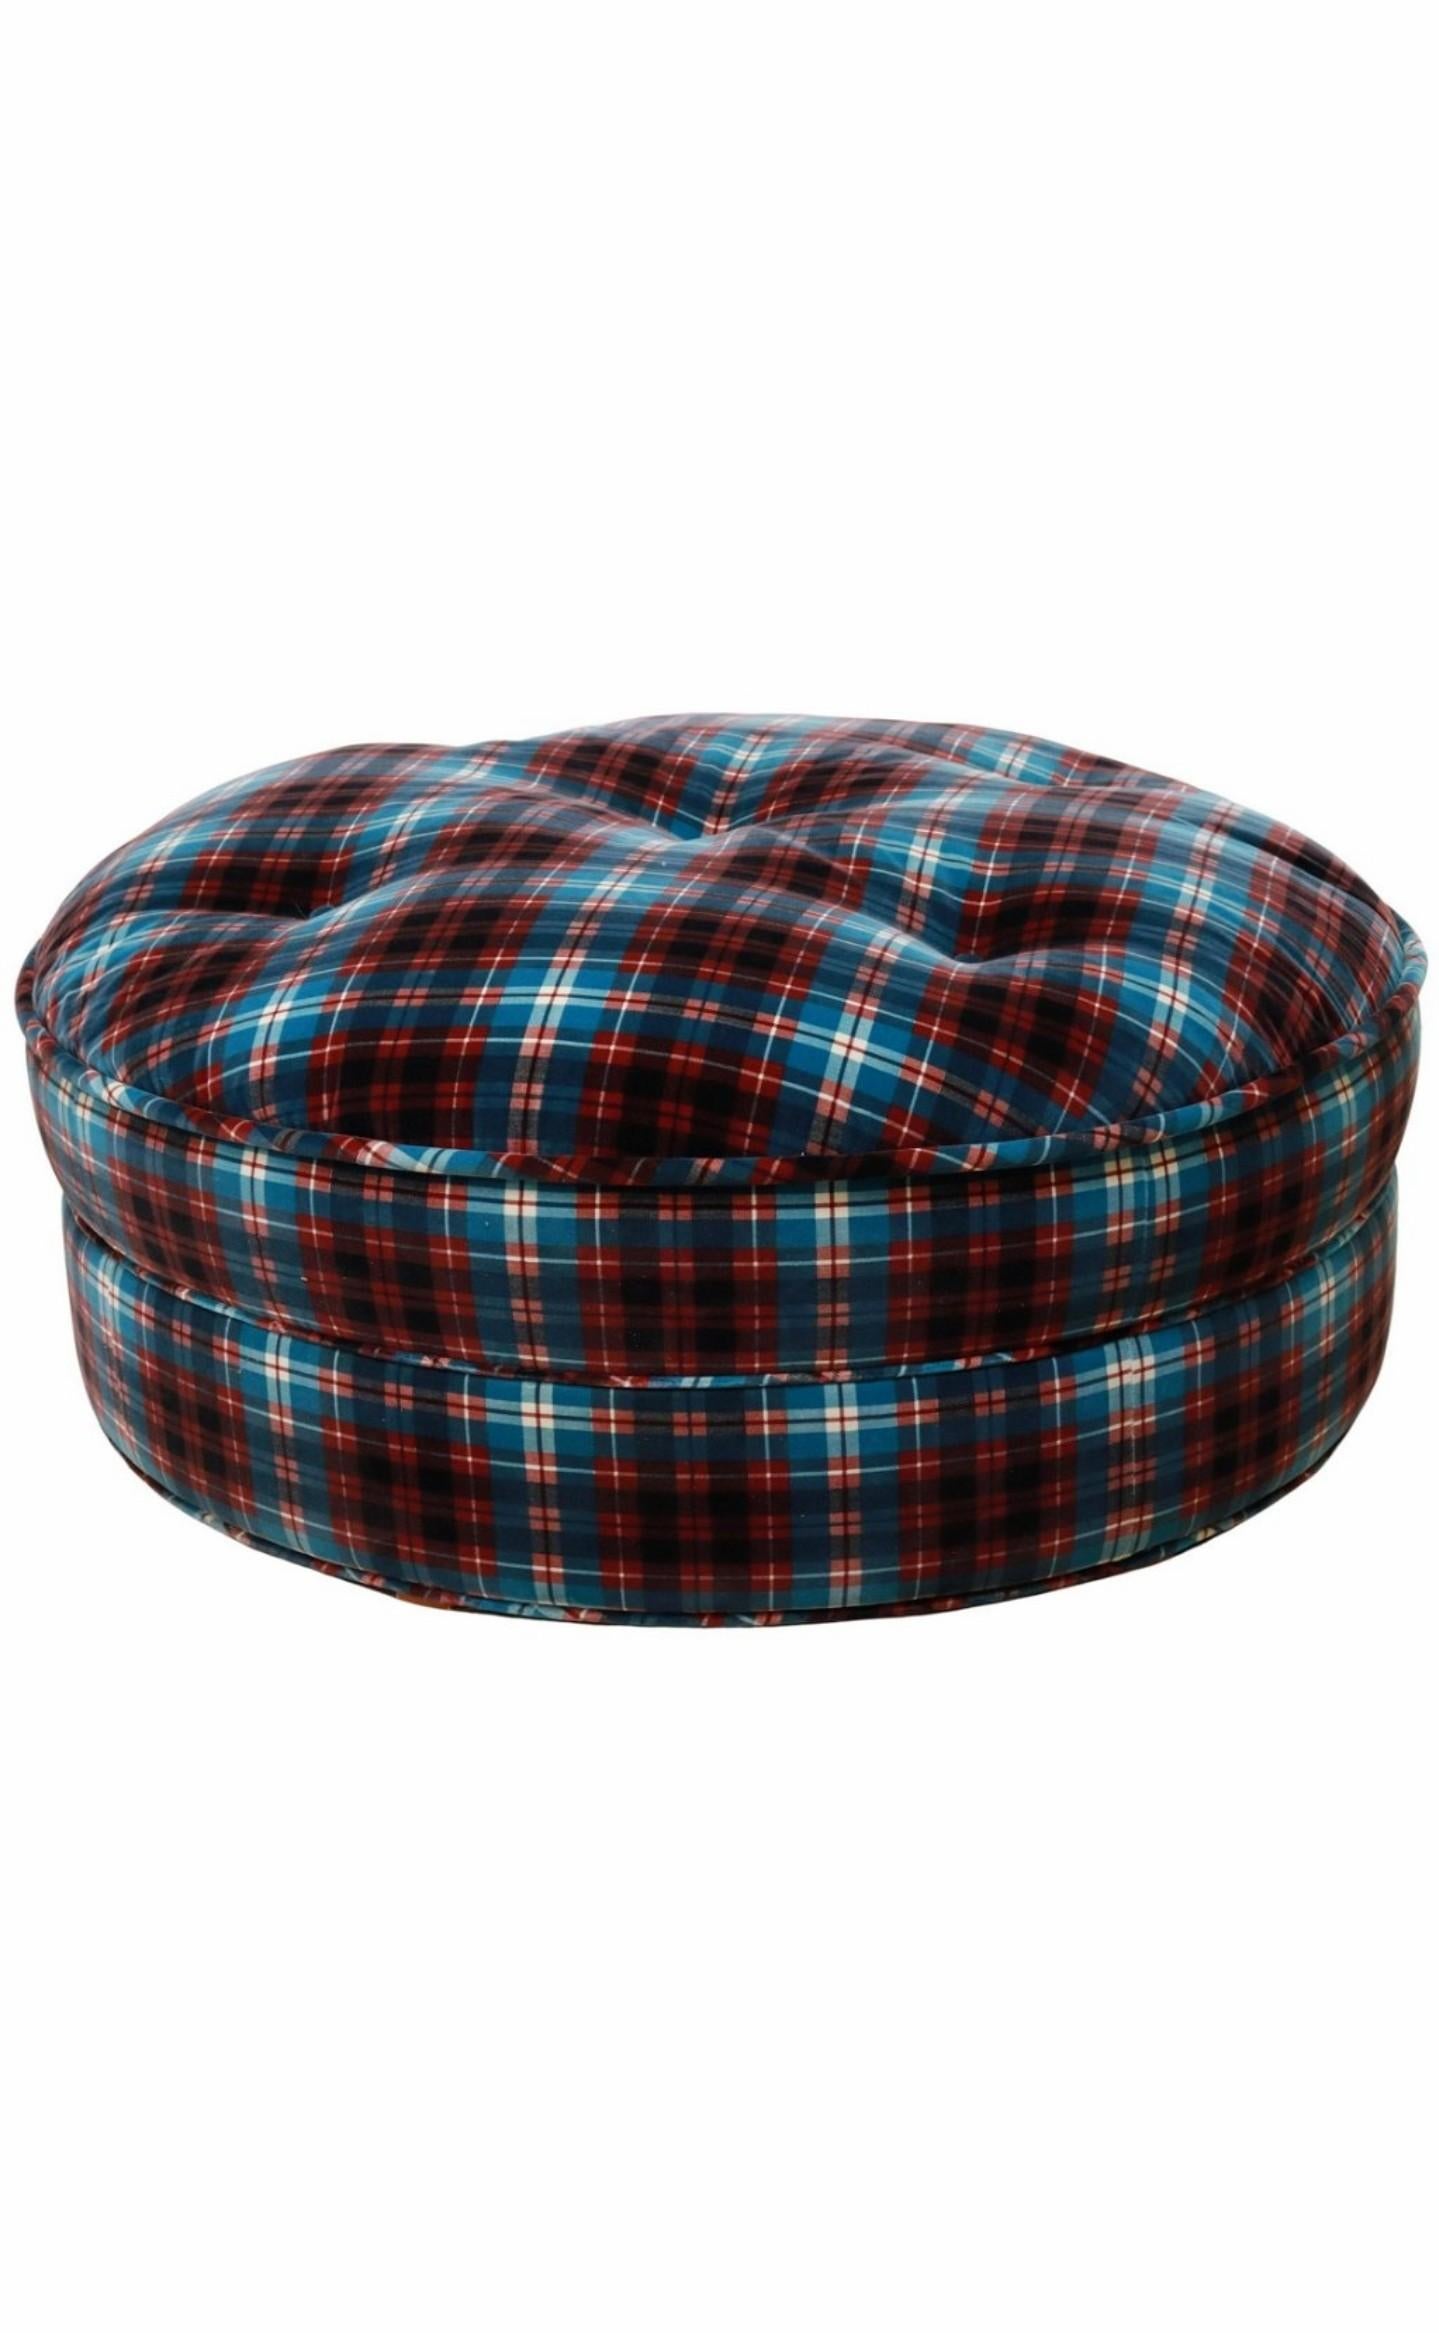 Add elegant rustic warmth, classic comfort, and unfussy sophistication to any space with this contemporary round ottoman, attributed to fine quality luxury furniture producer Roche Bobois, finished in distinctive 